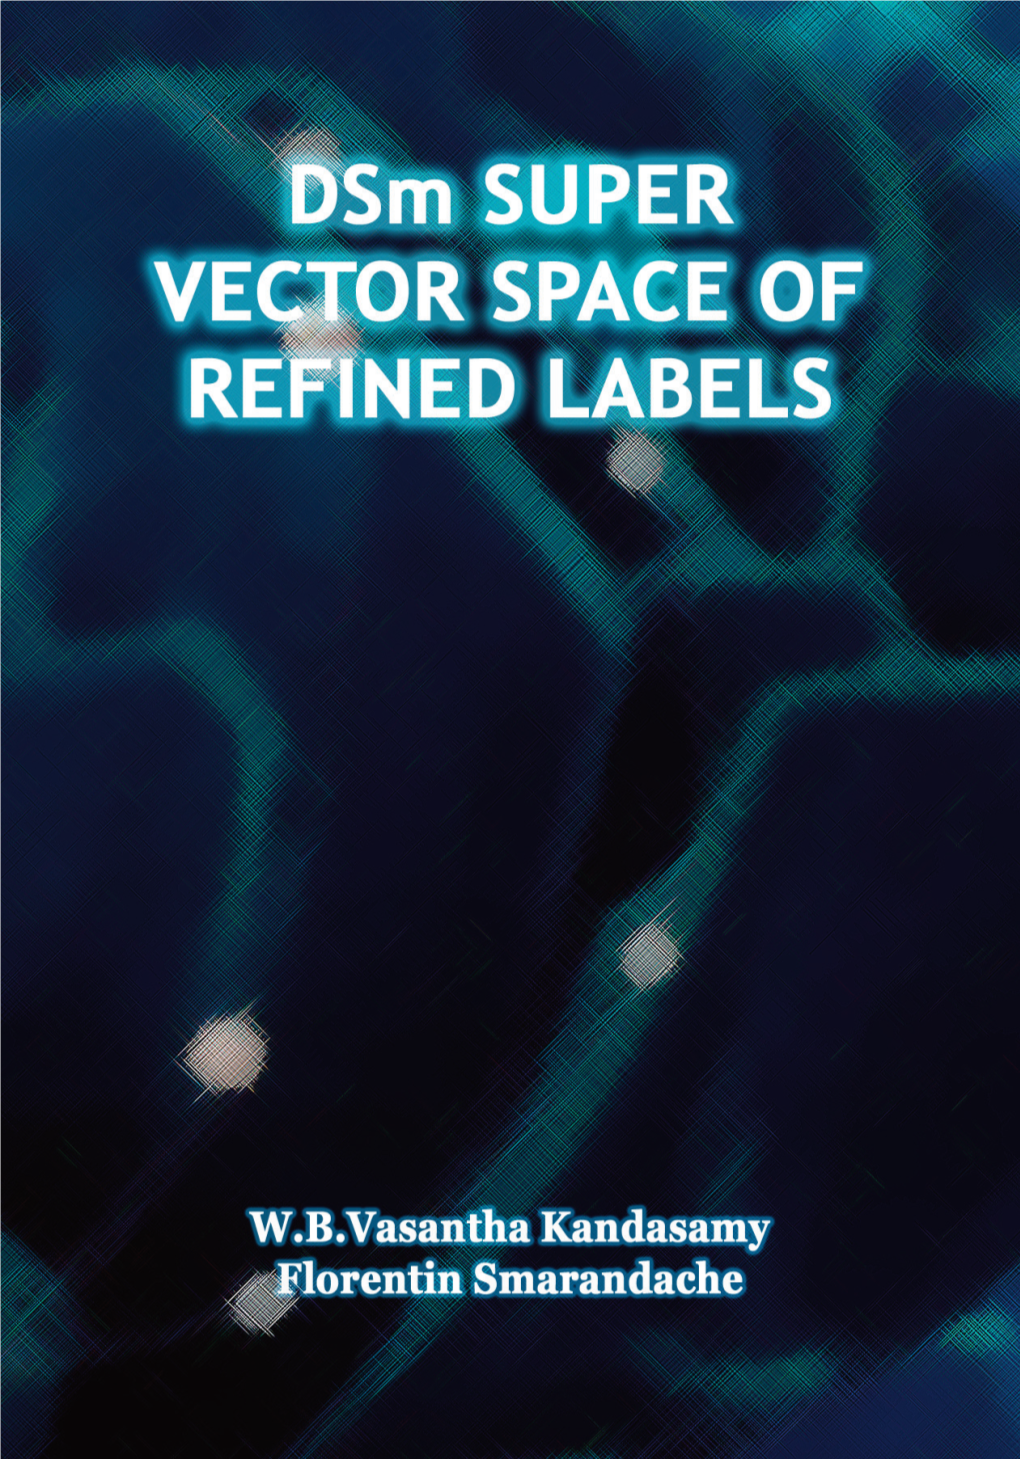 Dsm Super Vector Space of Refined Labels